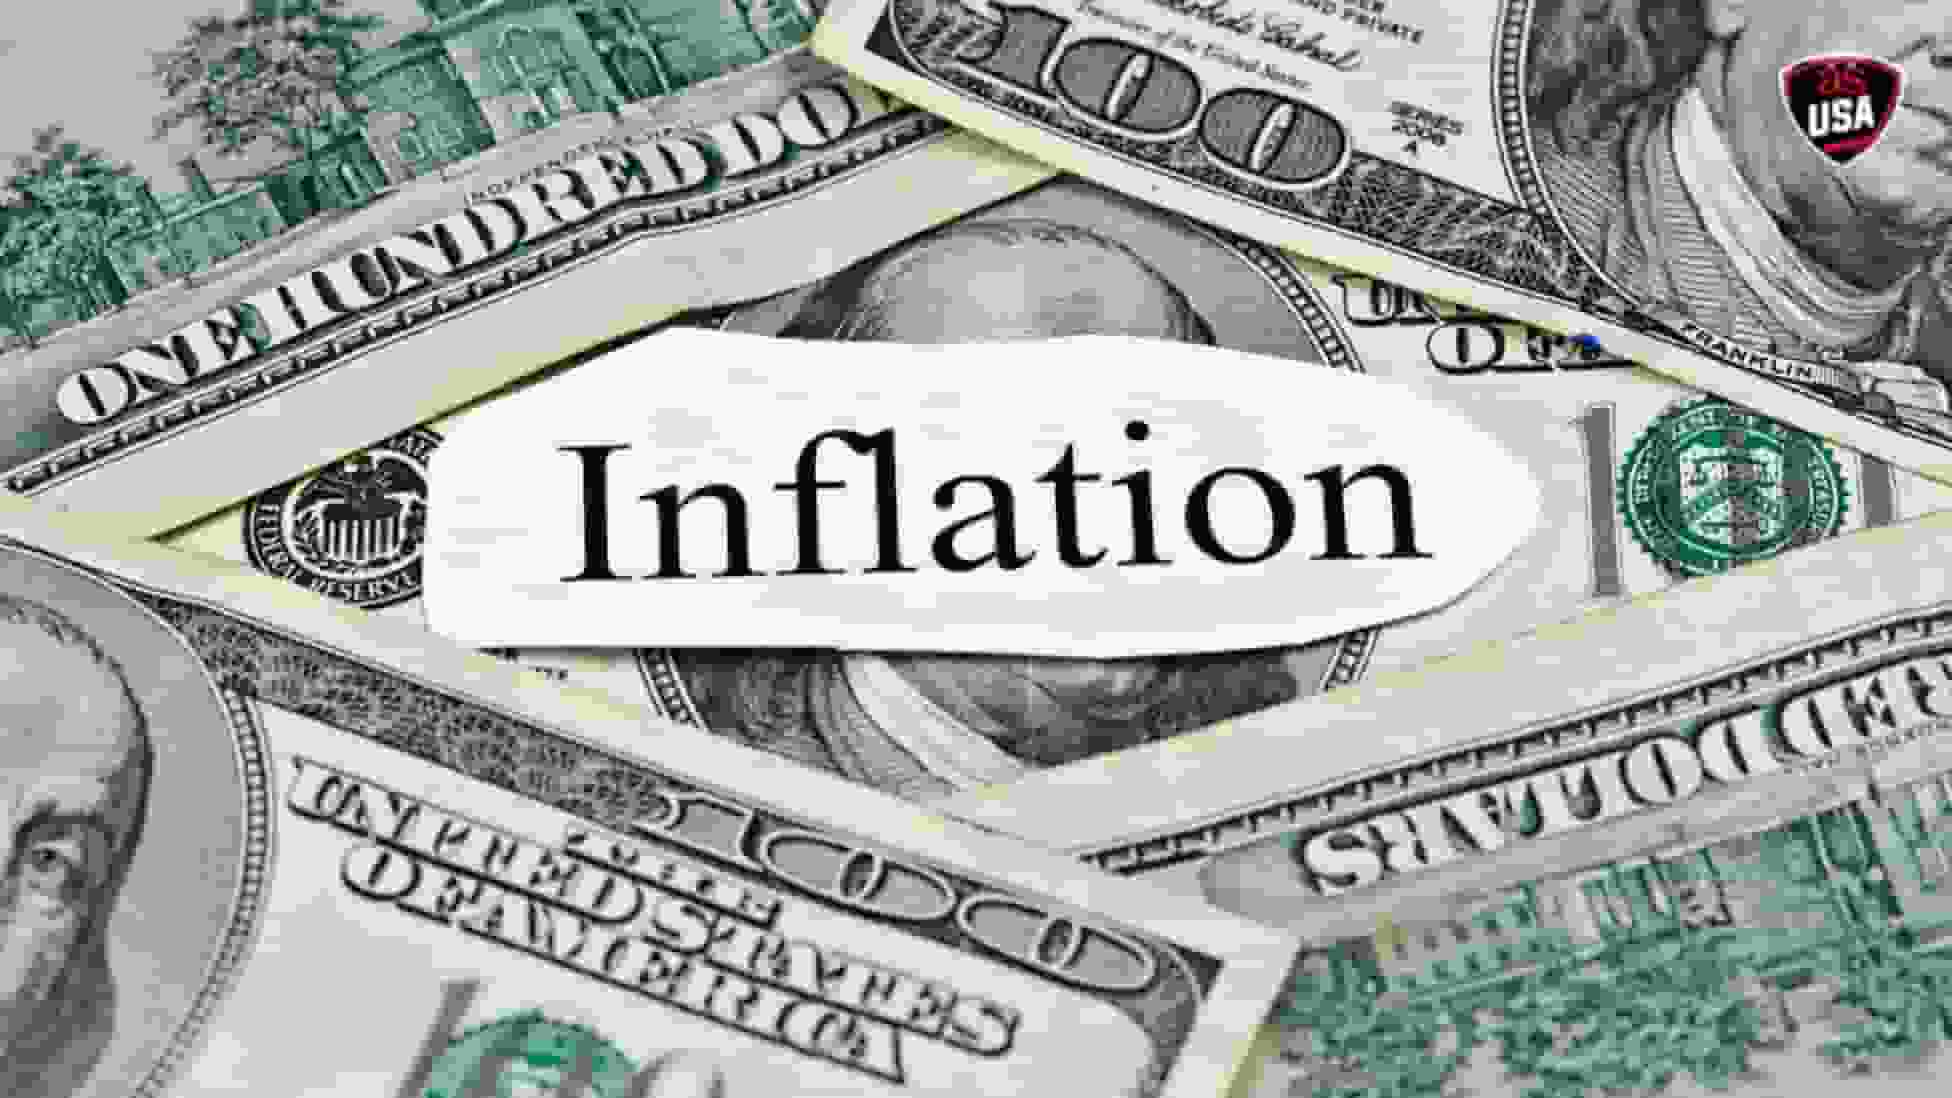 Inflation relief checks